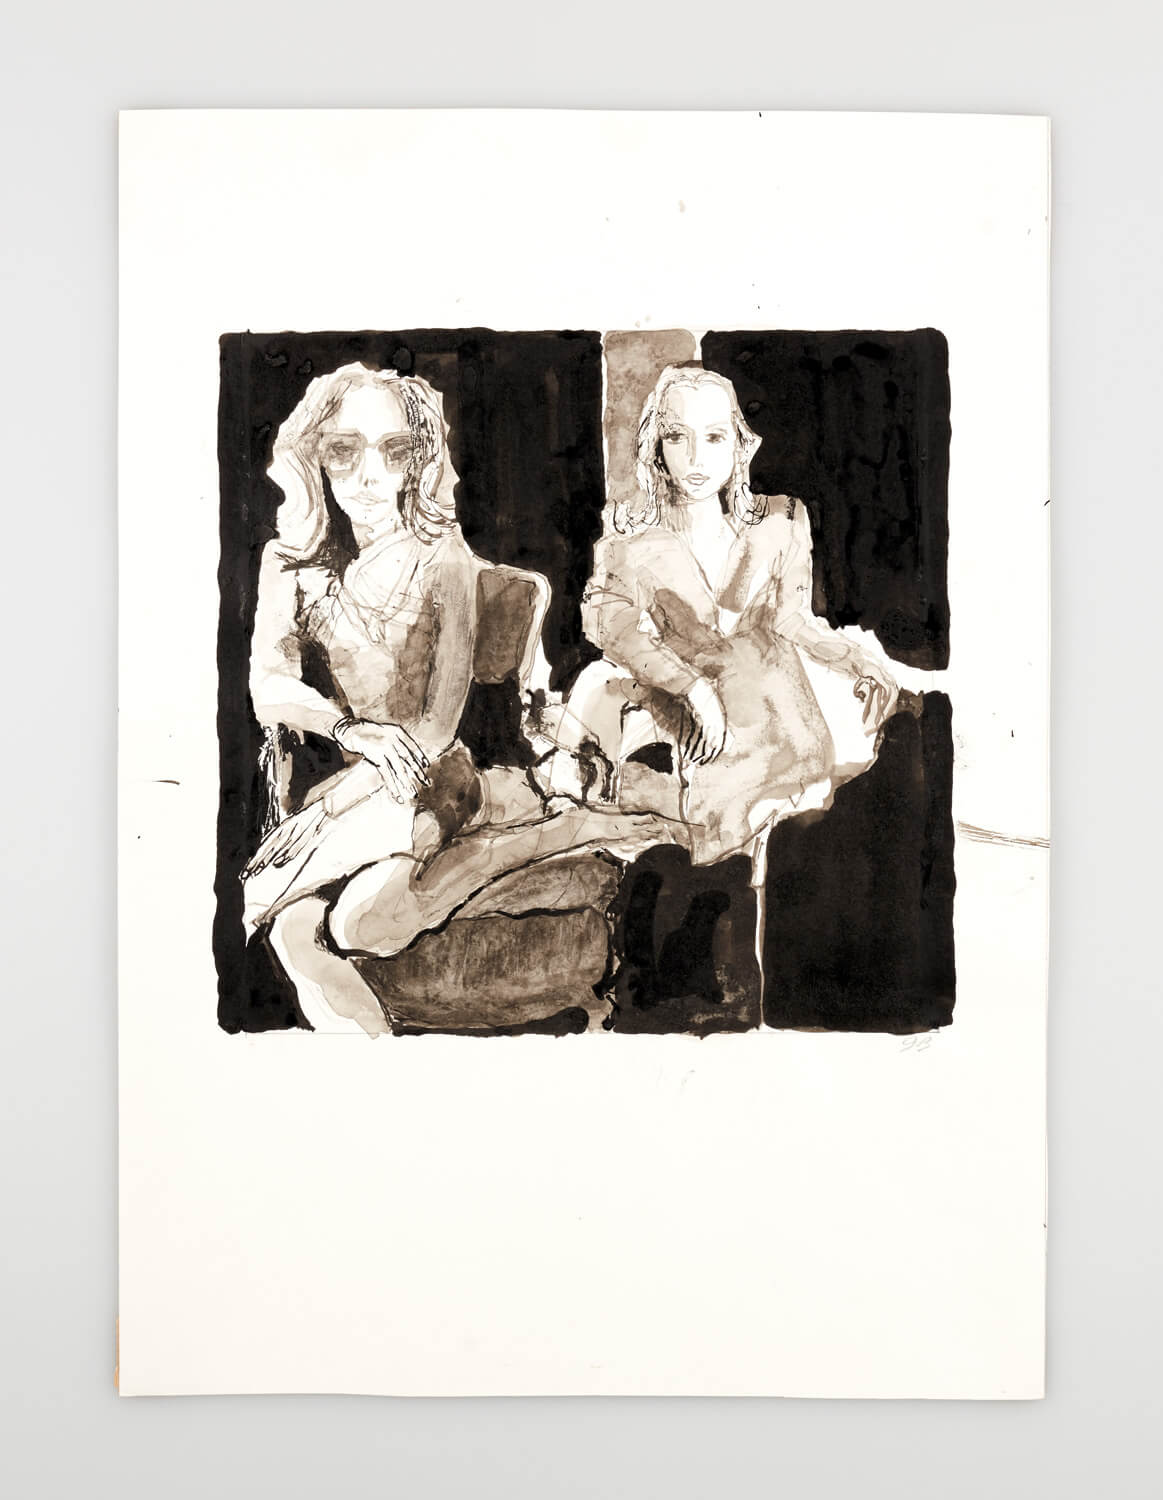 JB111 - Two Mannequins one wearing sunglasses - 2000 - 26 x 27 cm - Indian ink